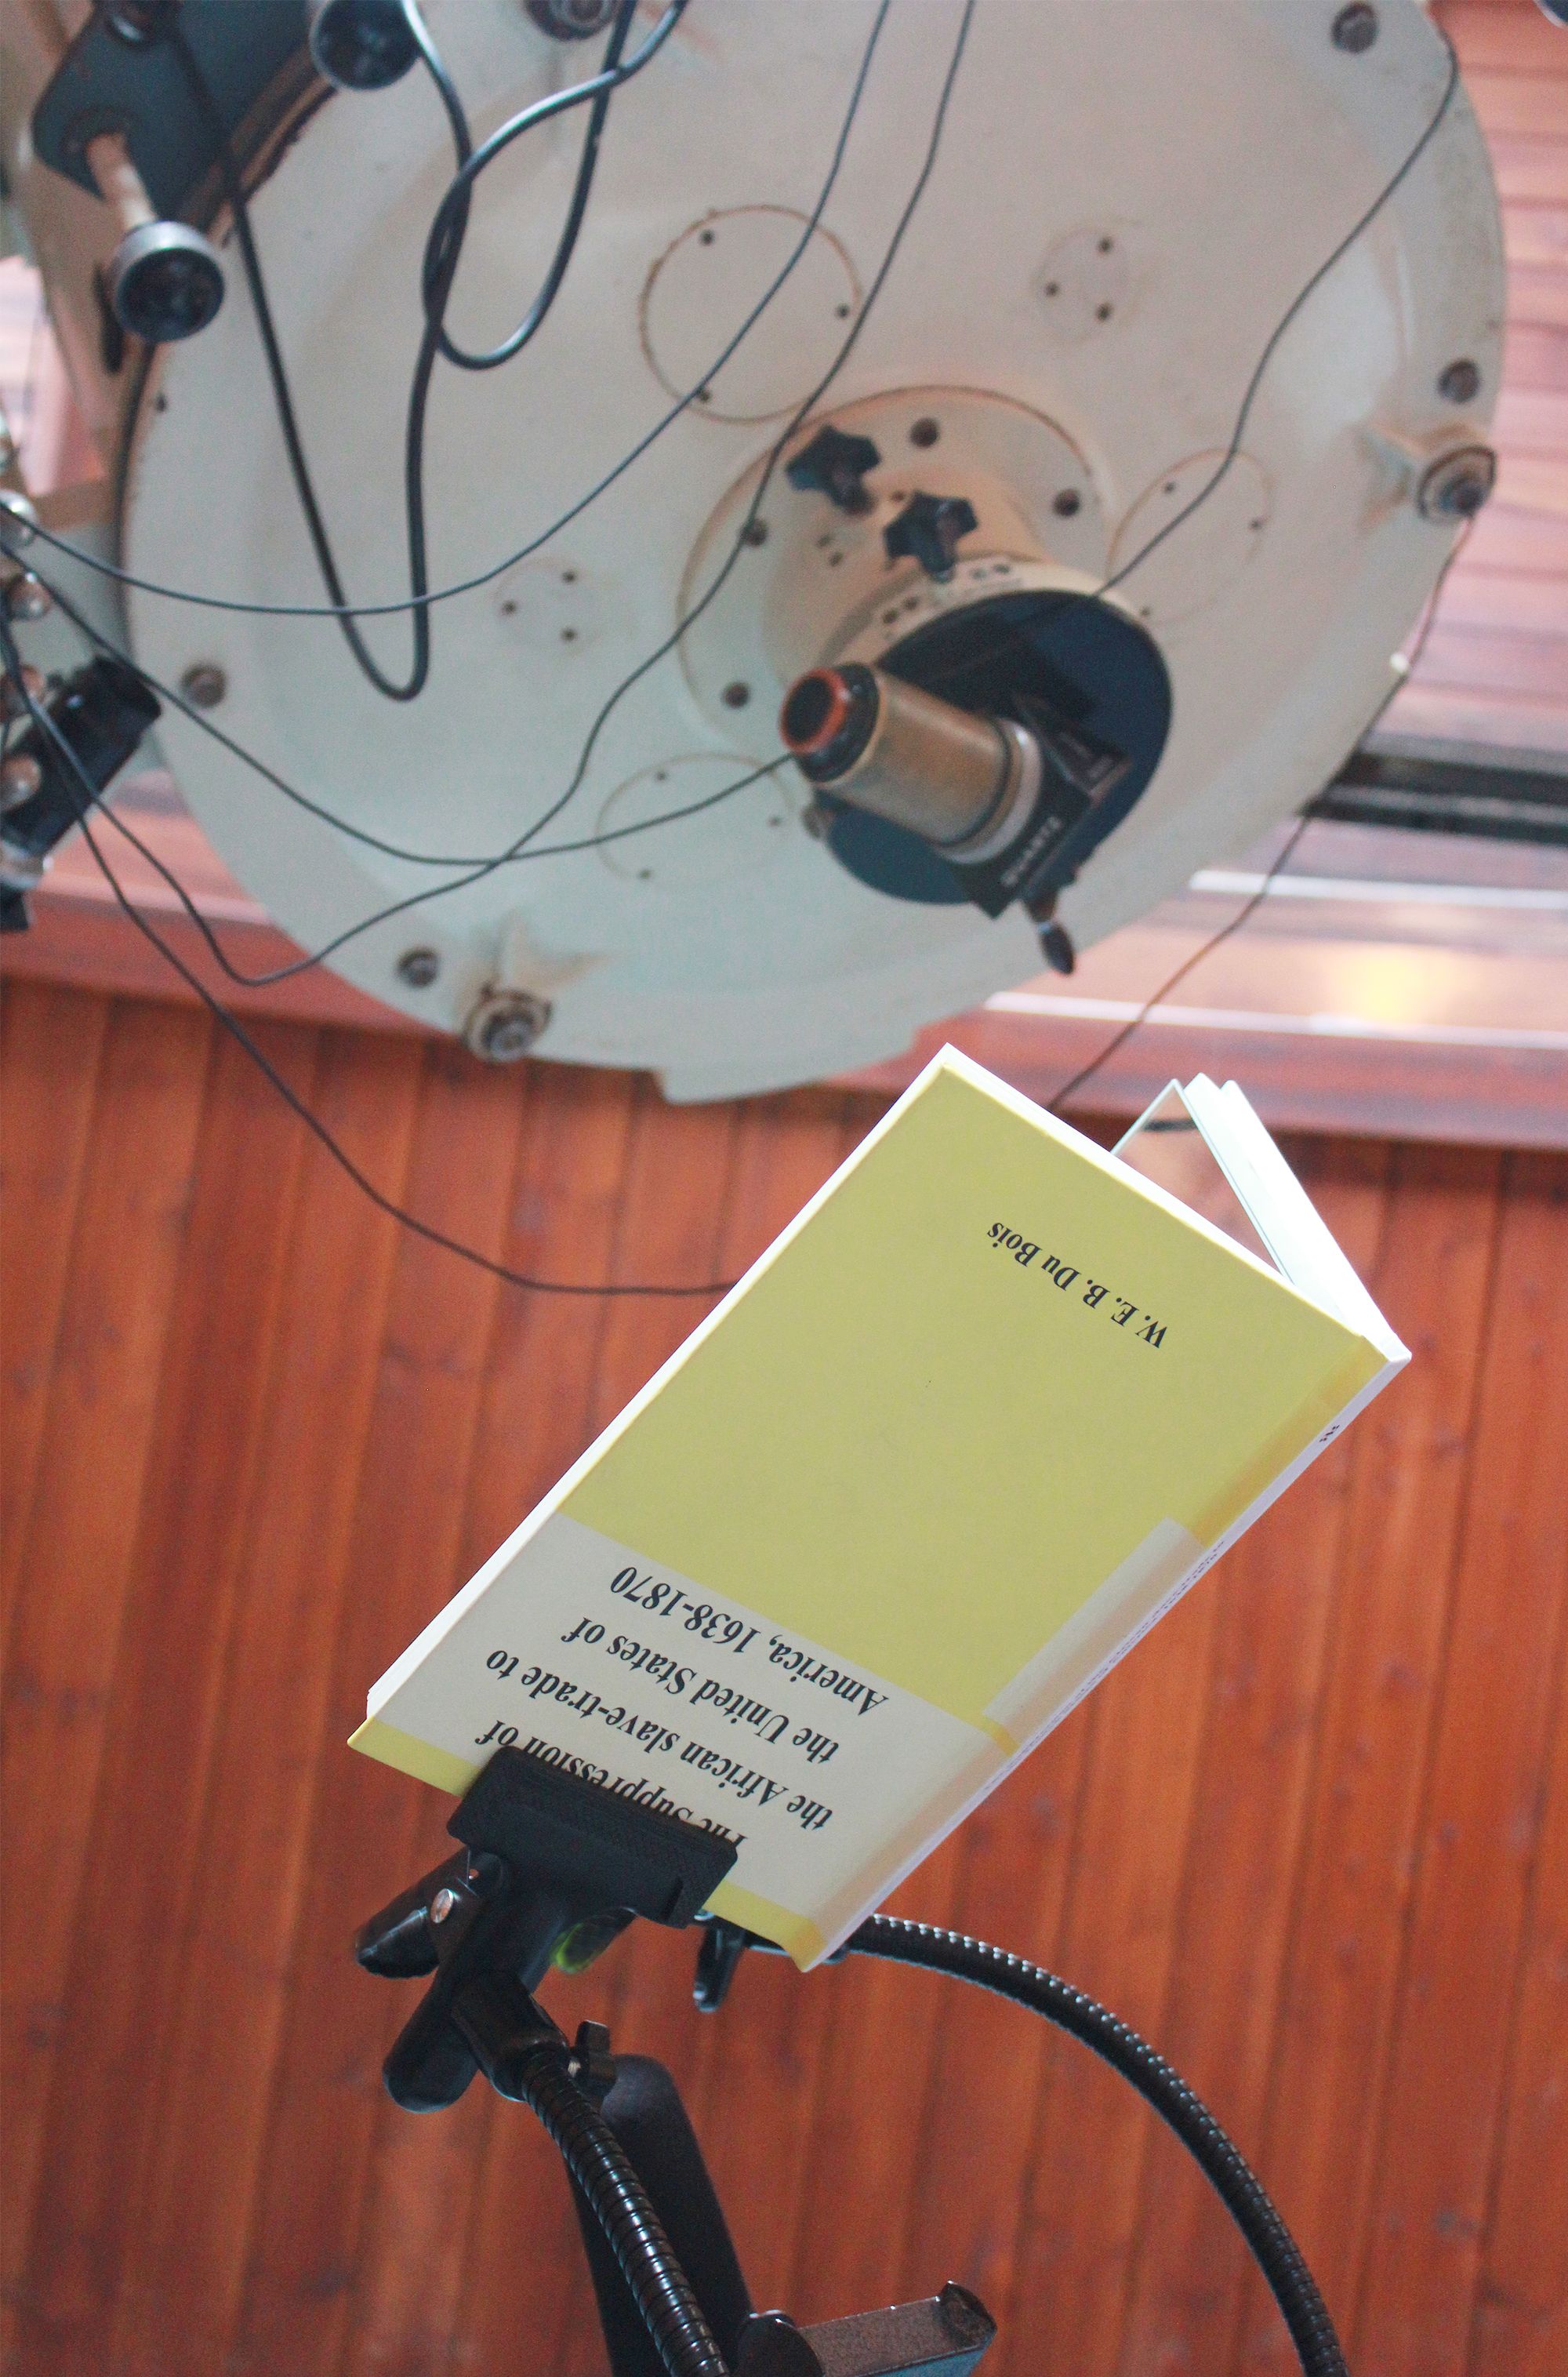 Installation view close-up of W. E. B. Du Bois book and telescope in PPKK 07.00 by Sarah Ancelle Schoenfeld and Louis-Philippe Scoufaras at Archenhold Observatory Berlin